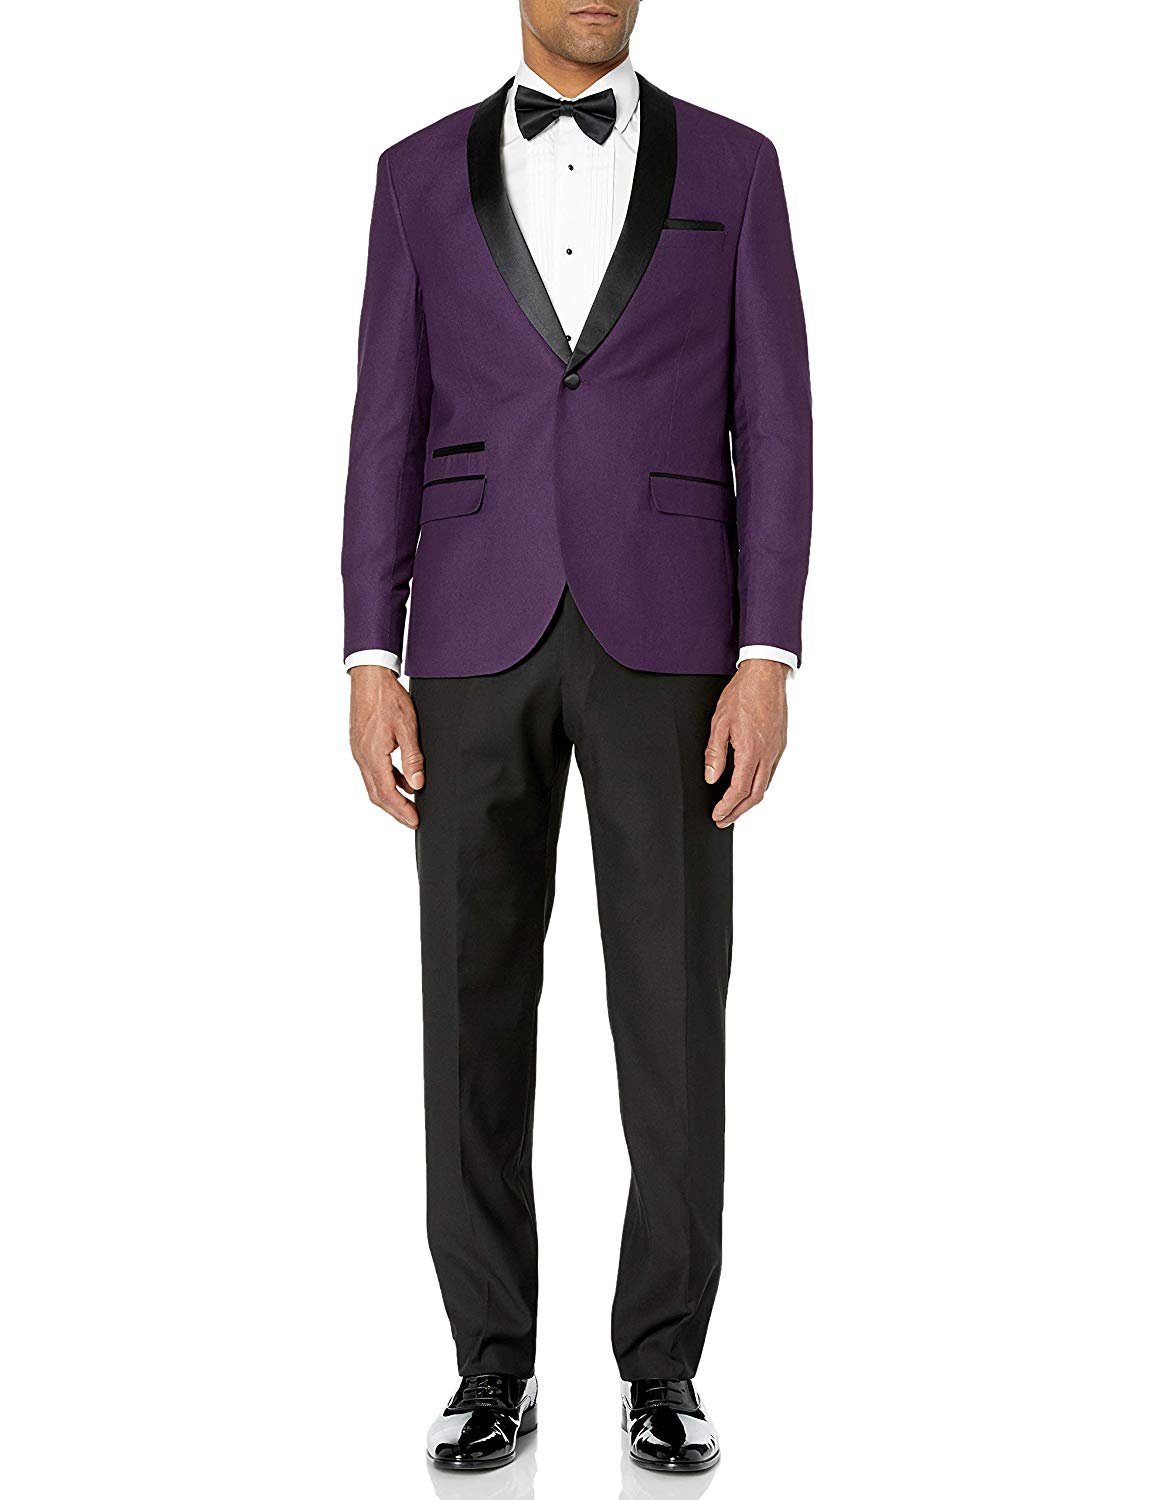 Available in Colors Adam Baker Mens Slim Fit One Button Satin Shawl Collar 2-Piece Tuxedo Suit 